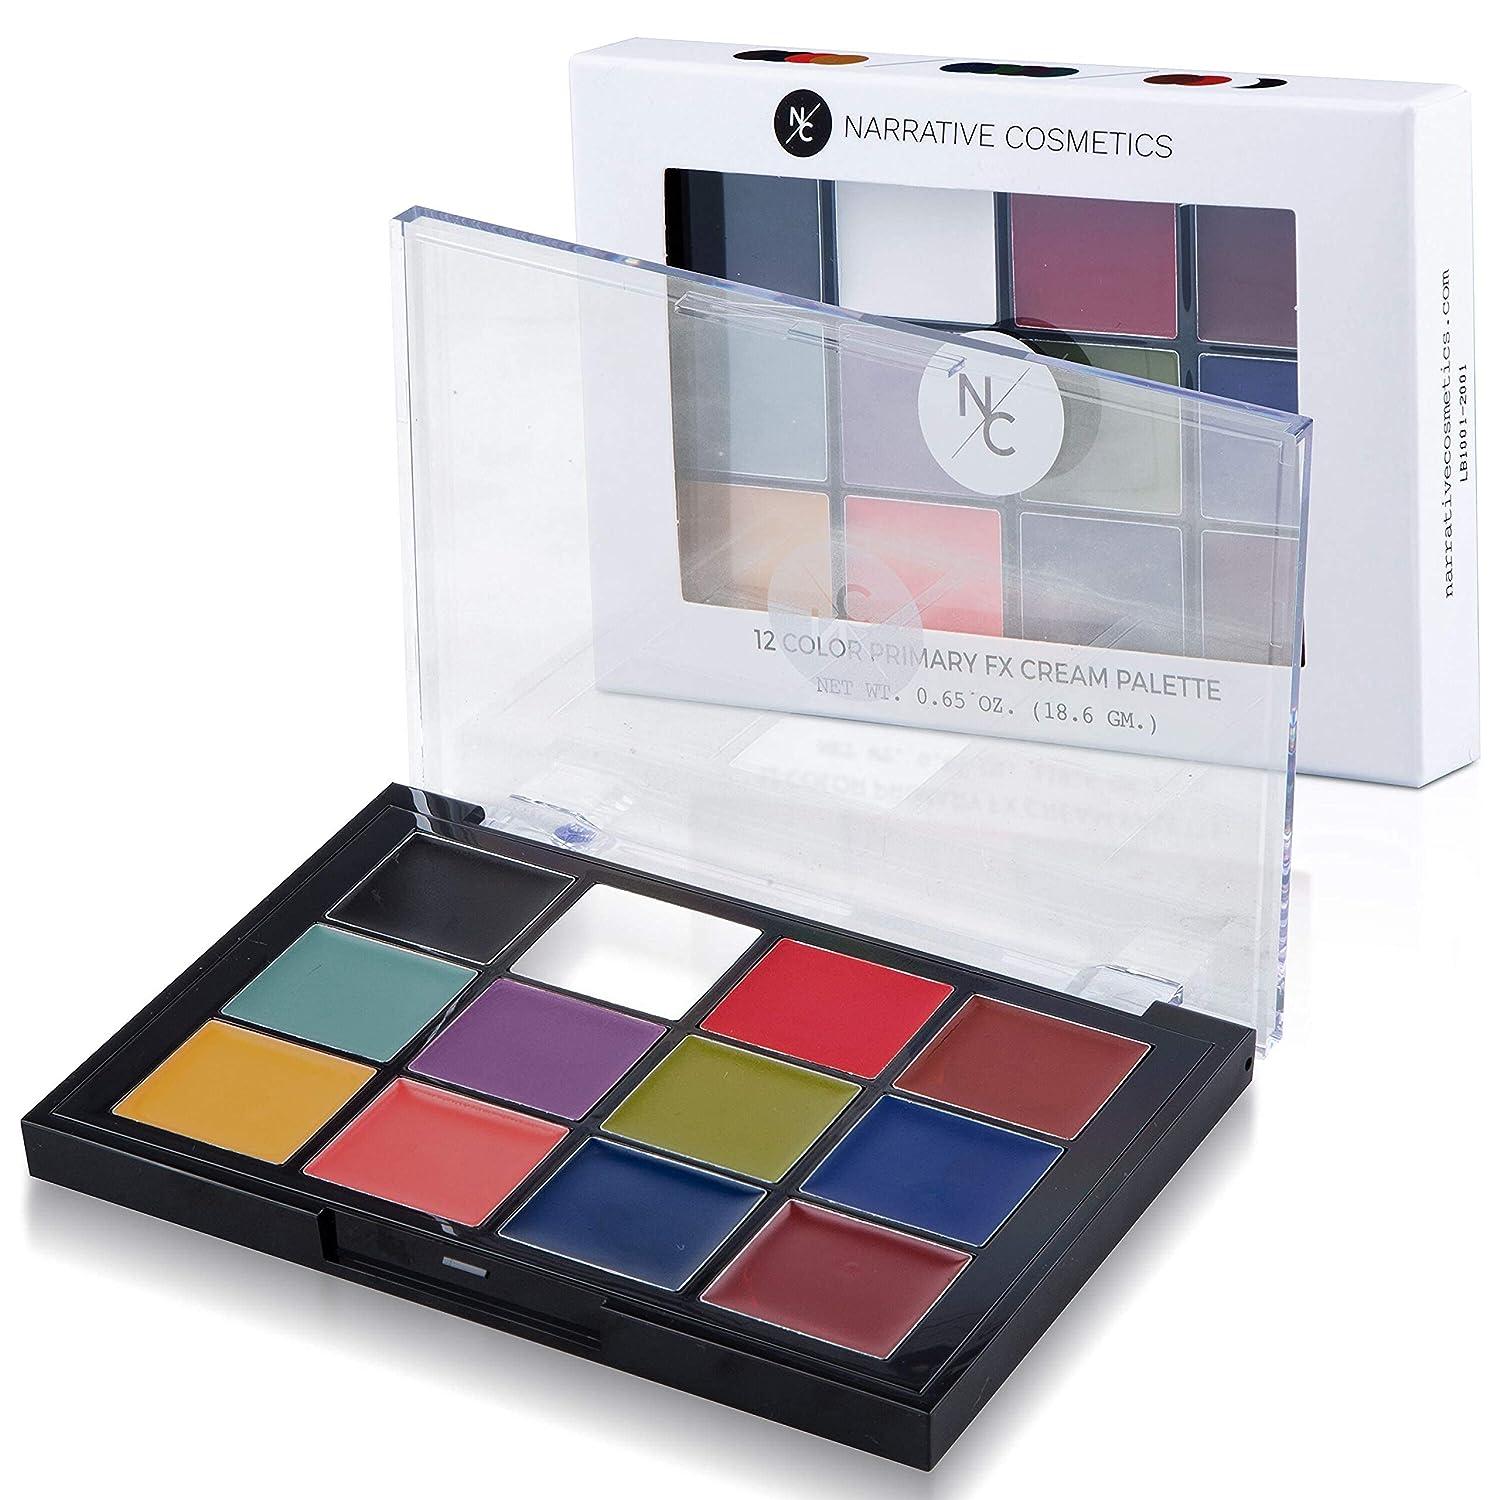 Narrative Cosmetics 12-Color Primary FX Cream Palette, Professional Quick  Drying Waterproof SFX Makeup for the Stage, Film, Costumes, Cosplay